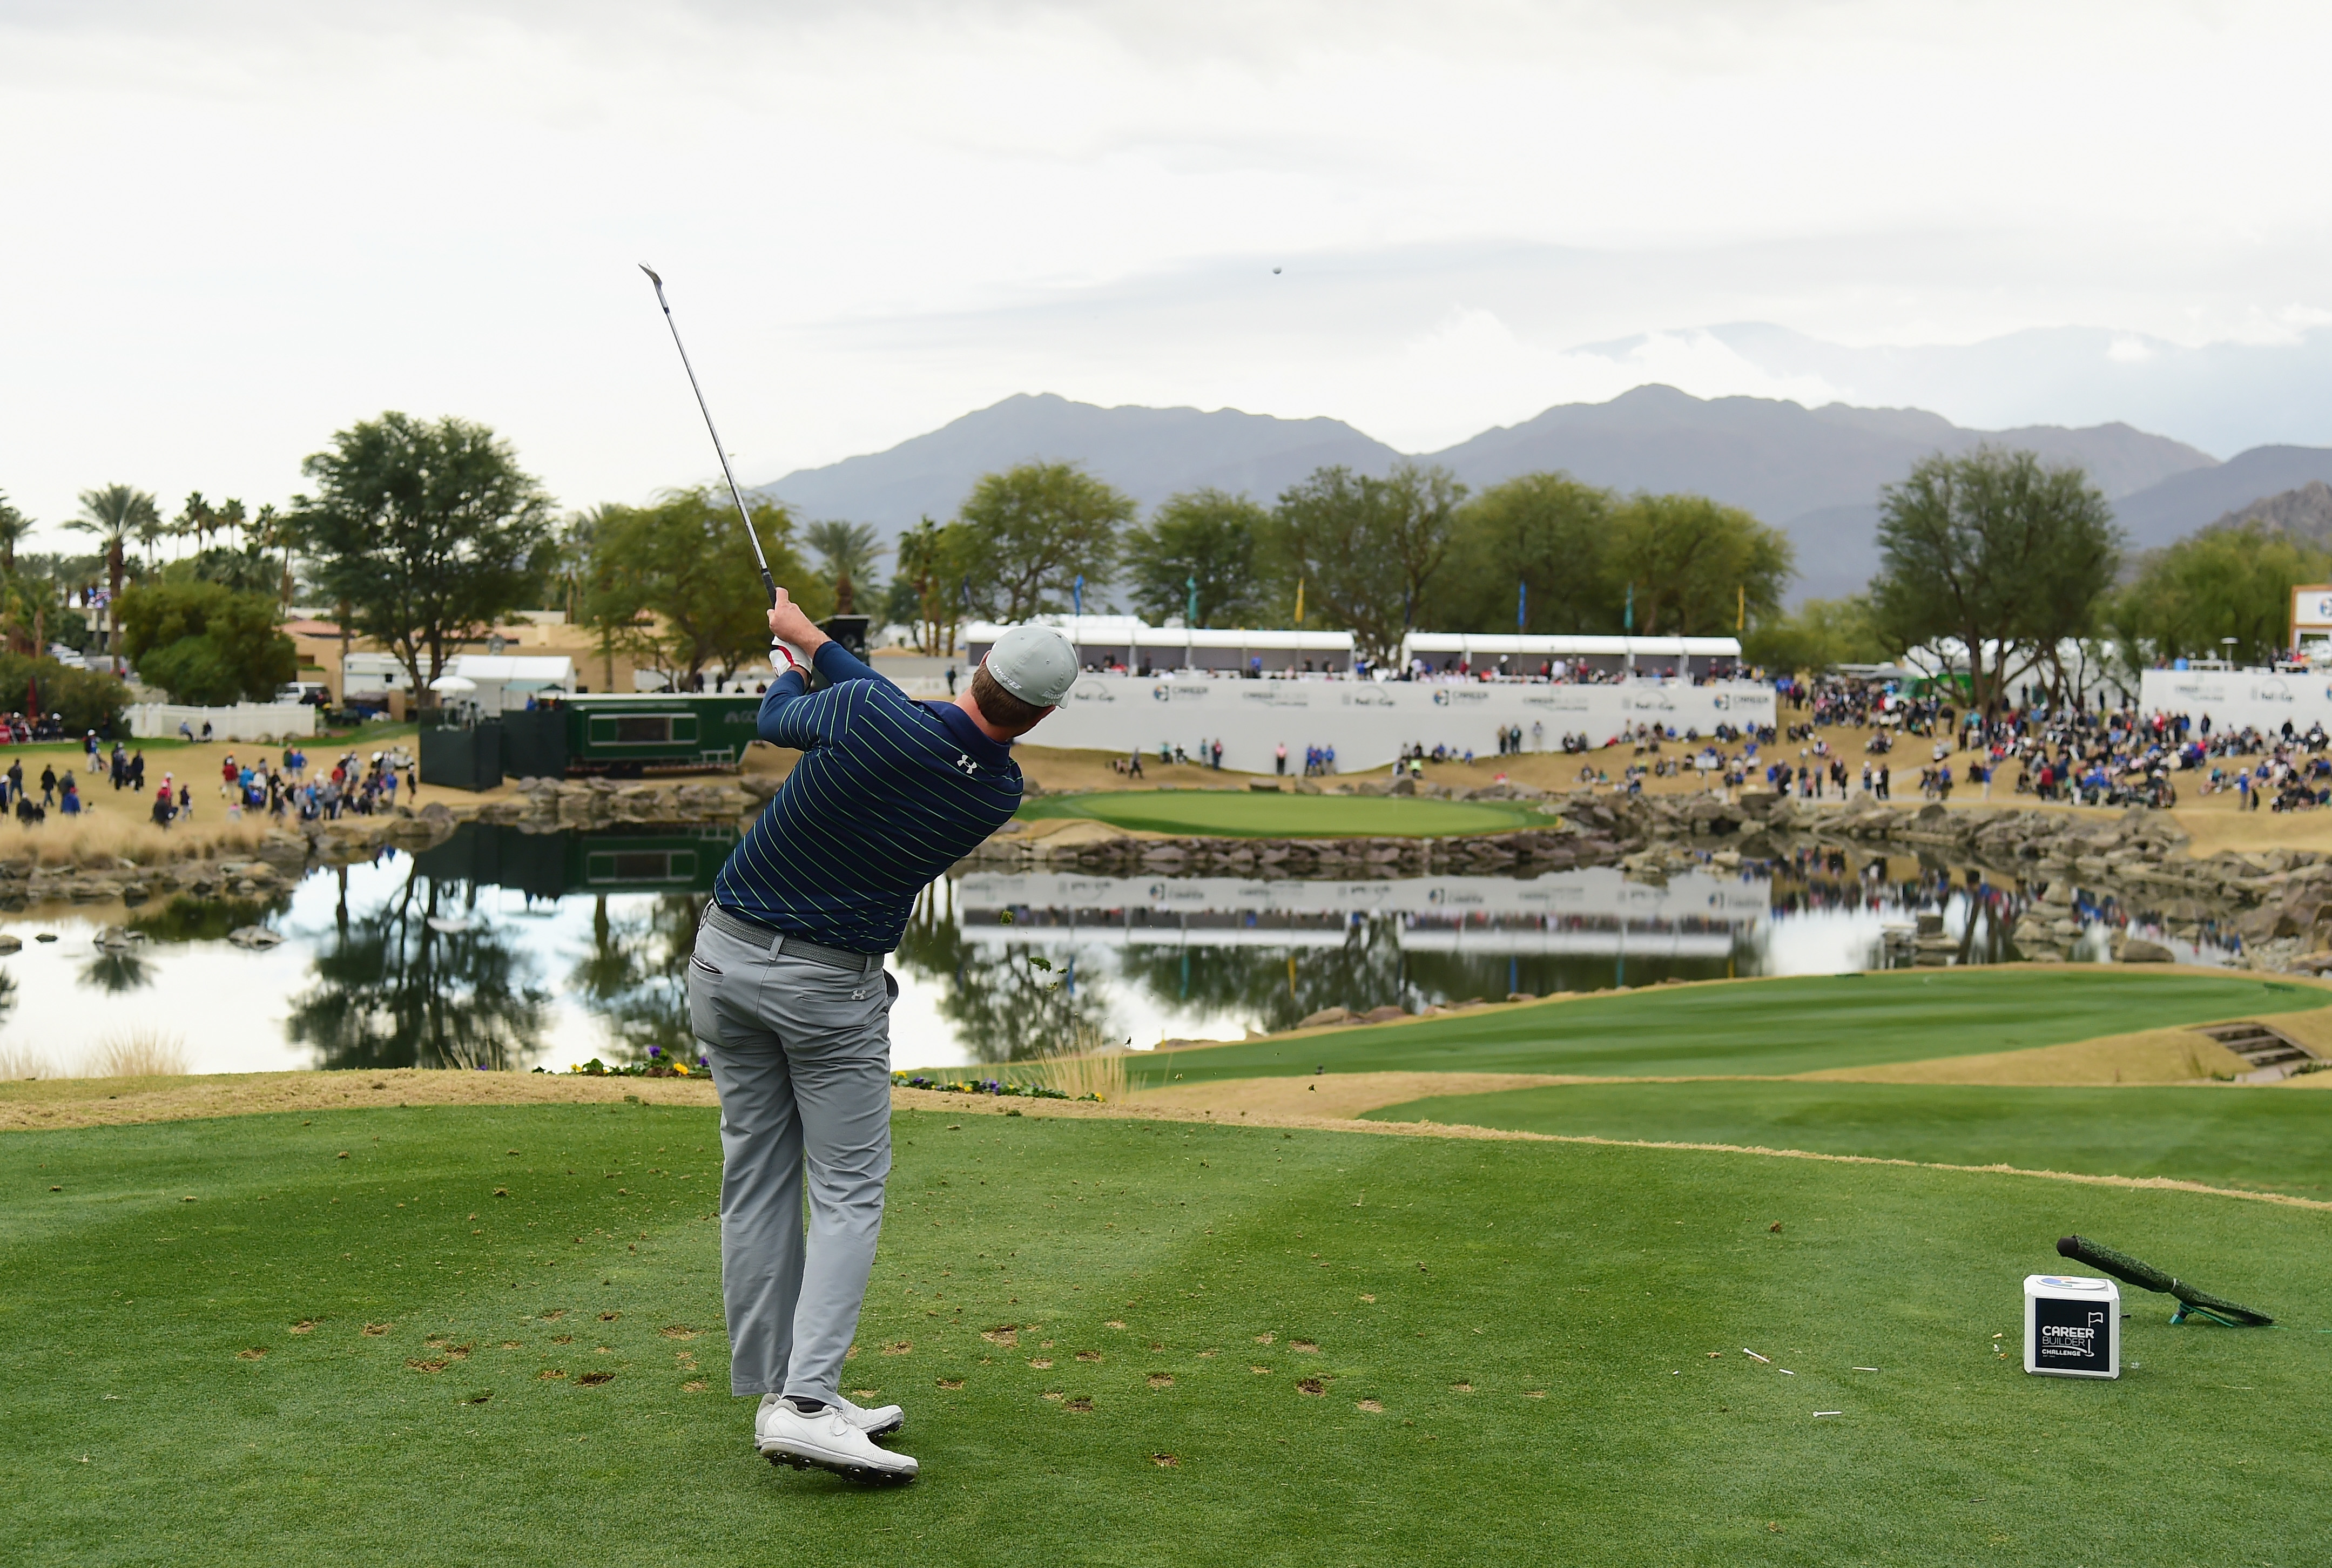 2019 Sony Open in Hawaii tee times, viewers guide Golf News and Tour Information Golf Digest